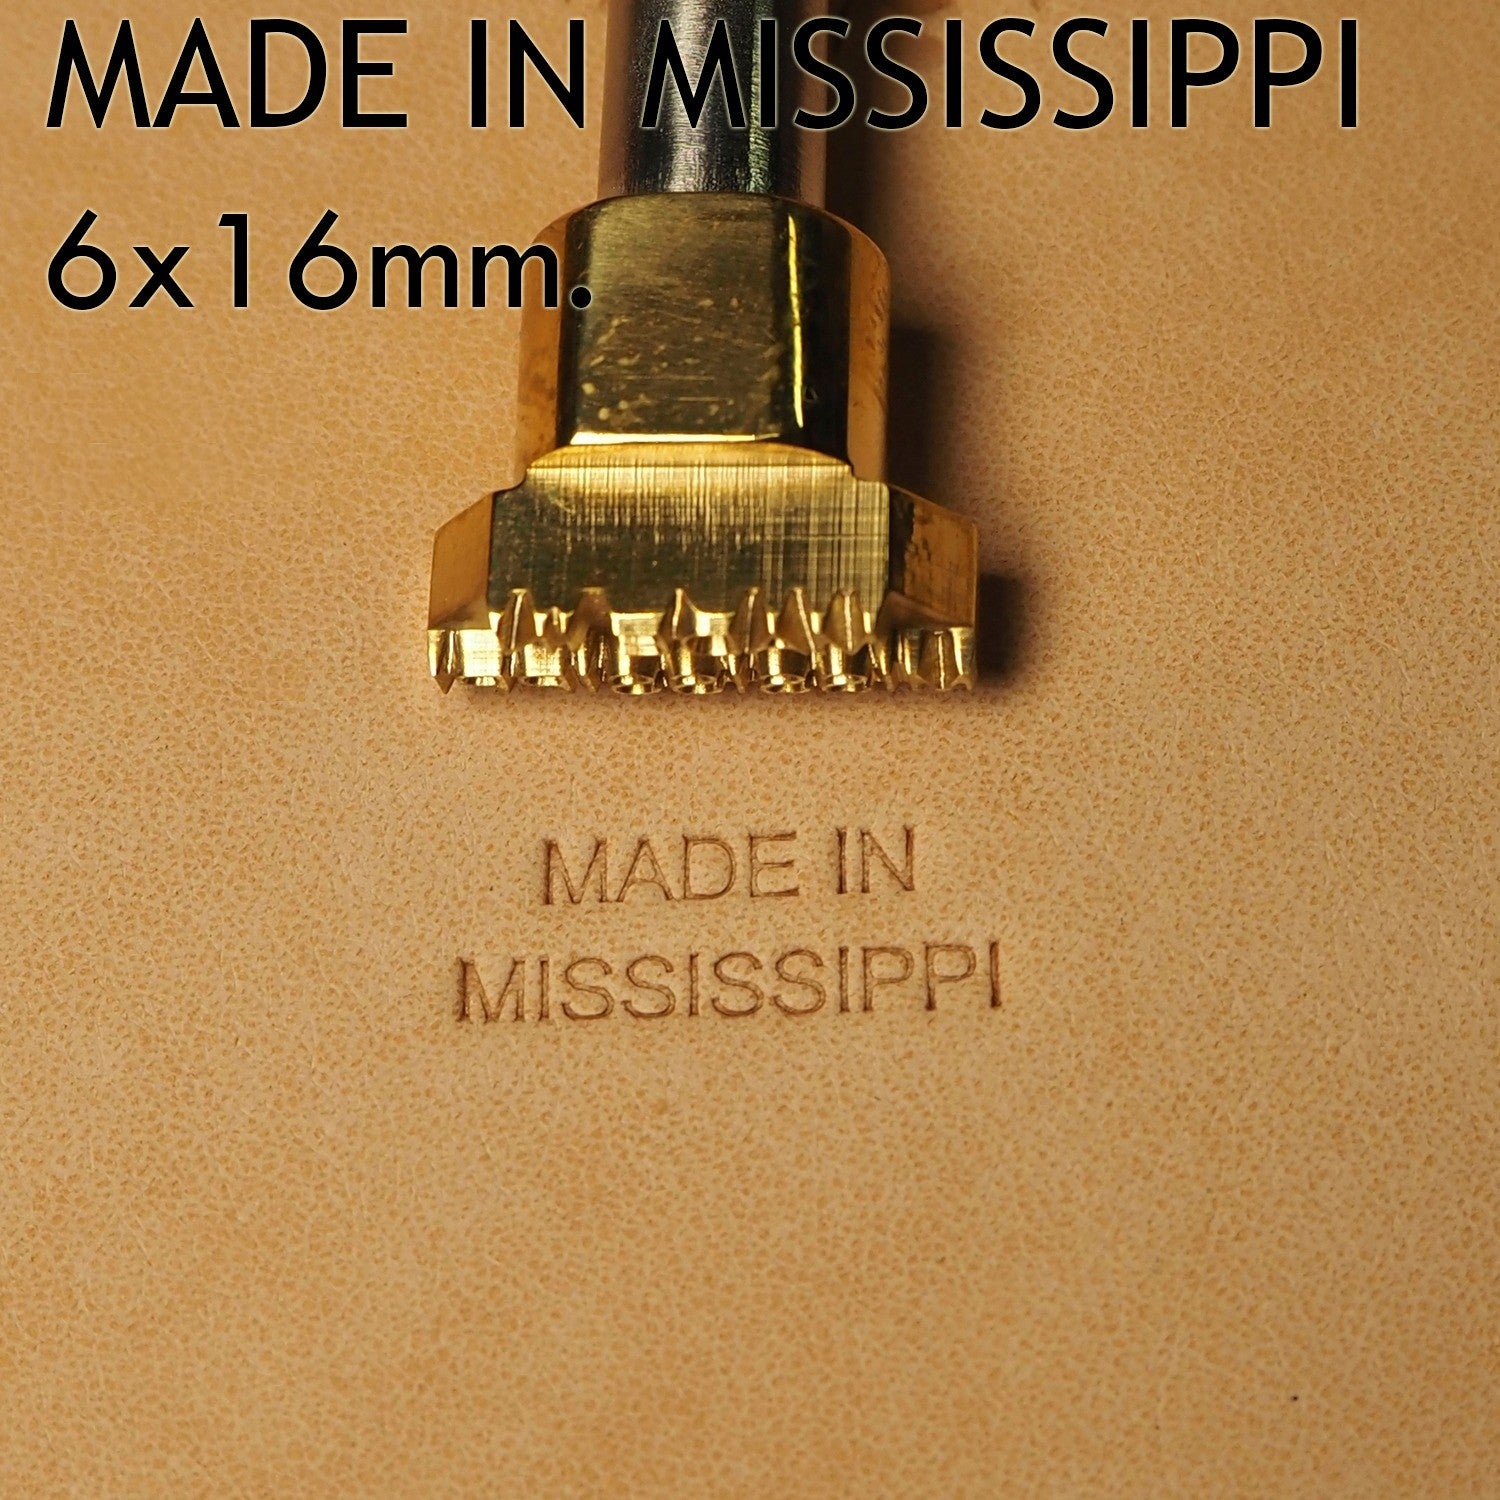 #Made In Mississippi - Leather Crafting Stamp Tool